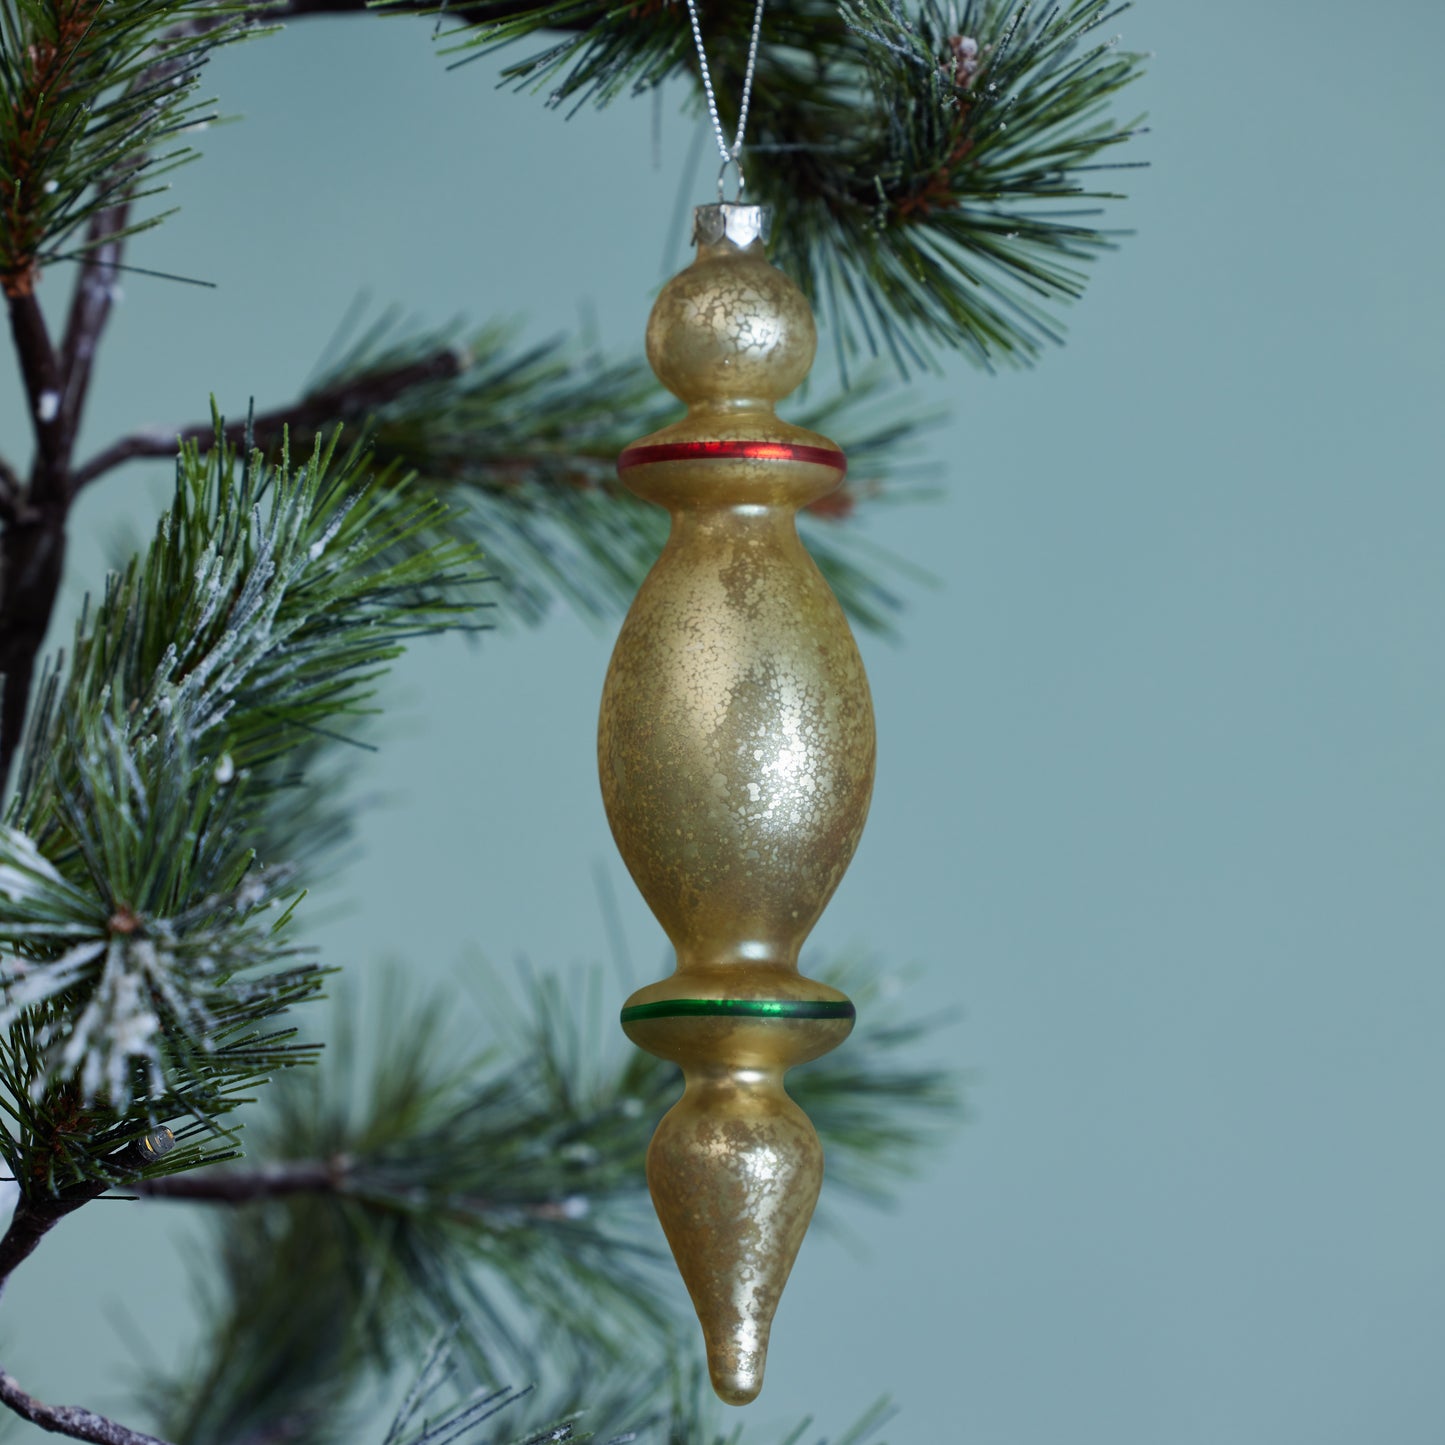 Hand-Painted Mercury Glass Finial Ornament